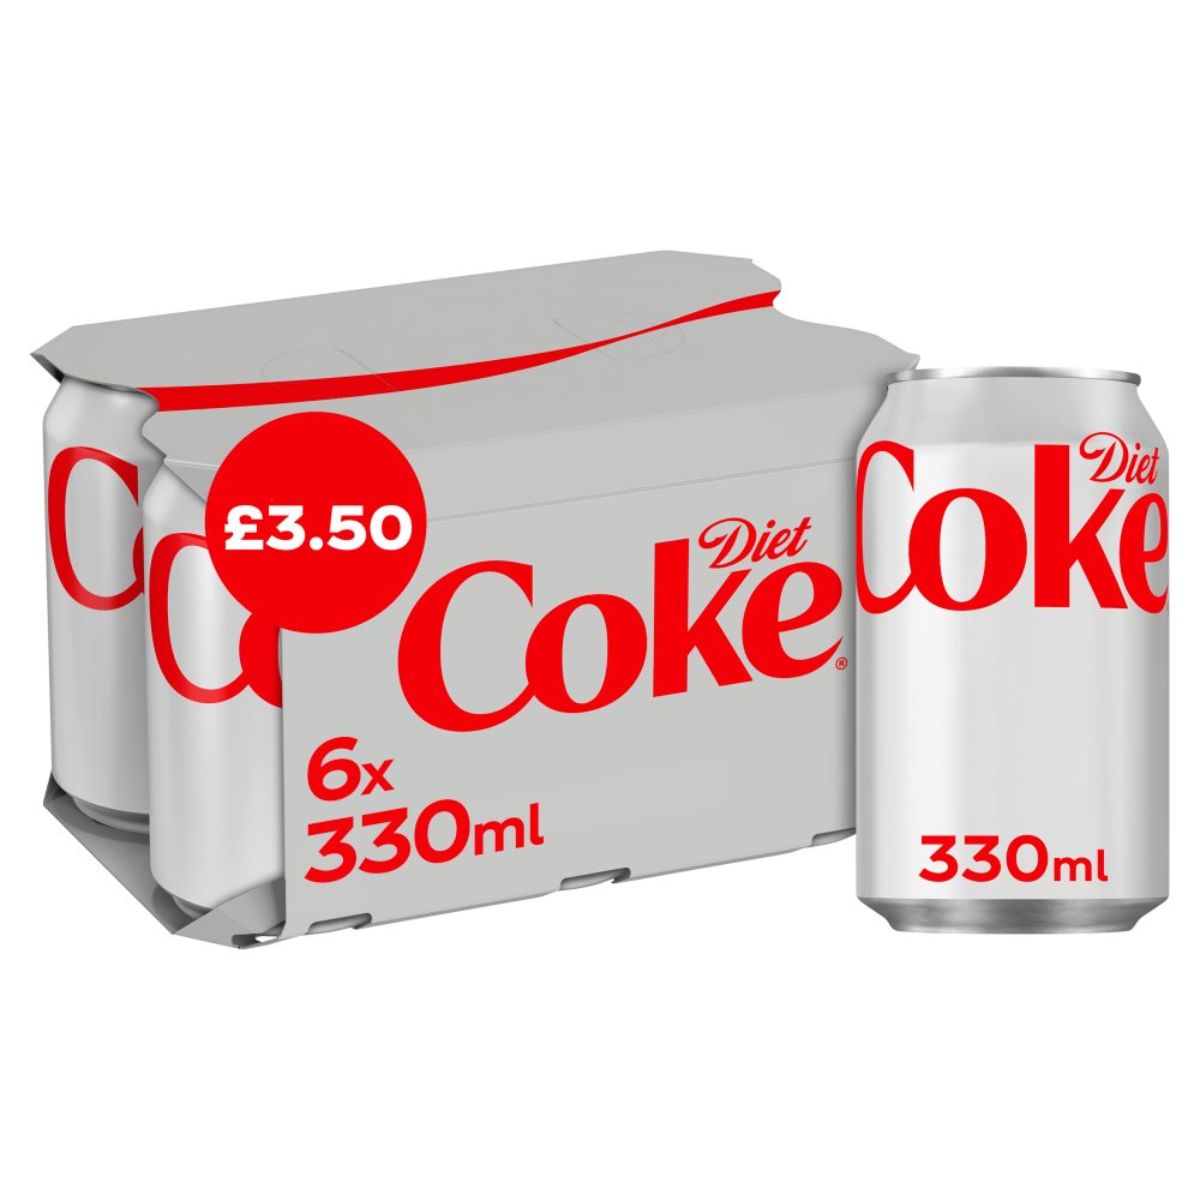 A box of Diet coke - Multipack - 6 x 330 ml and a box of Diet coke - Multipack - 6 x 330 ml.